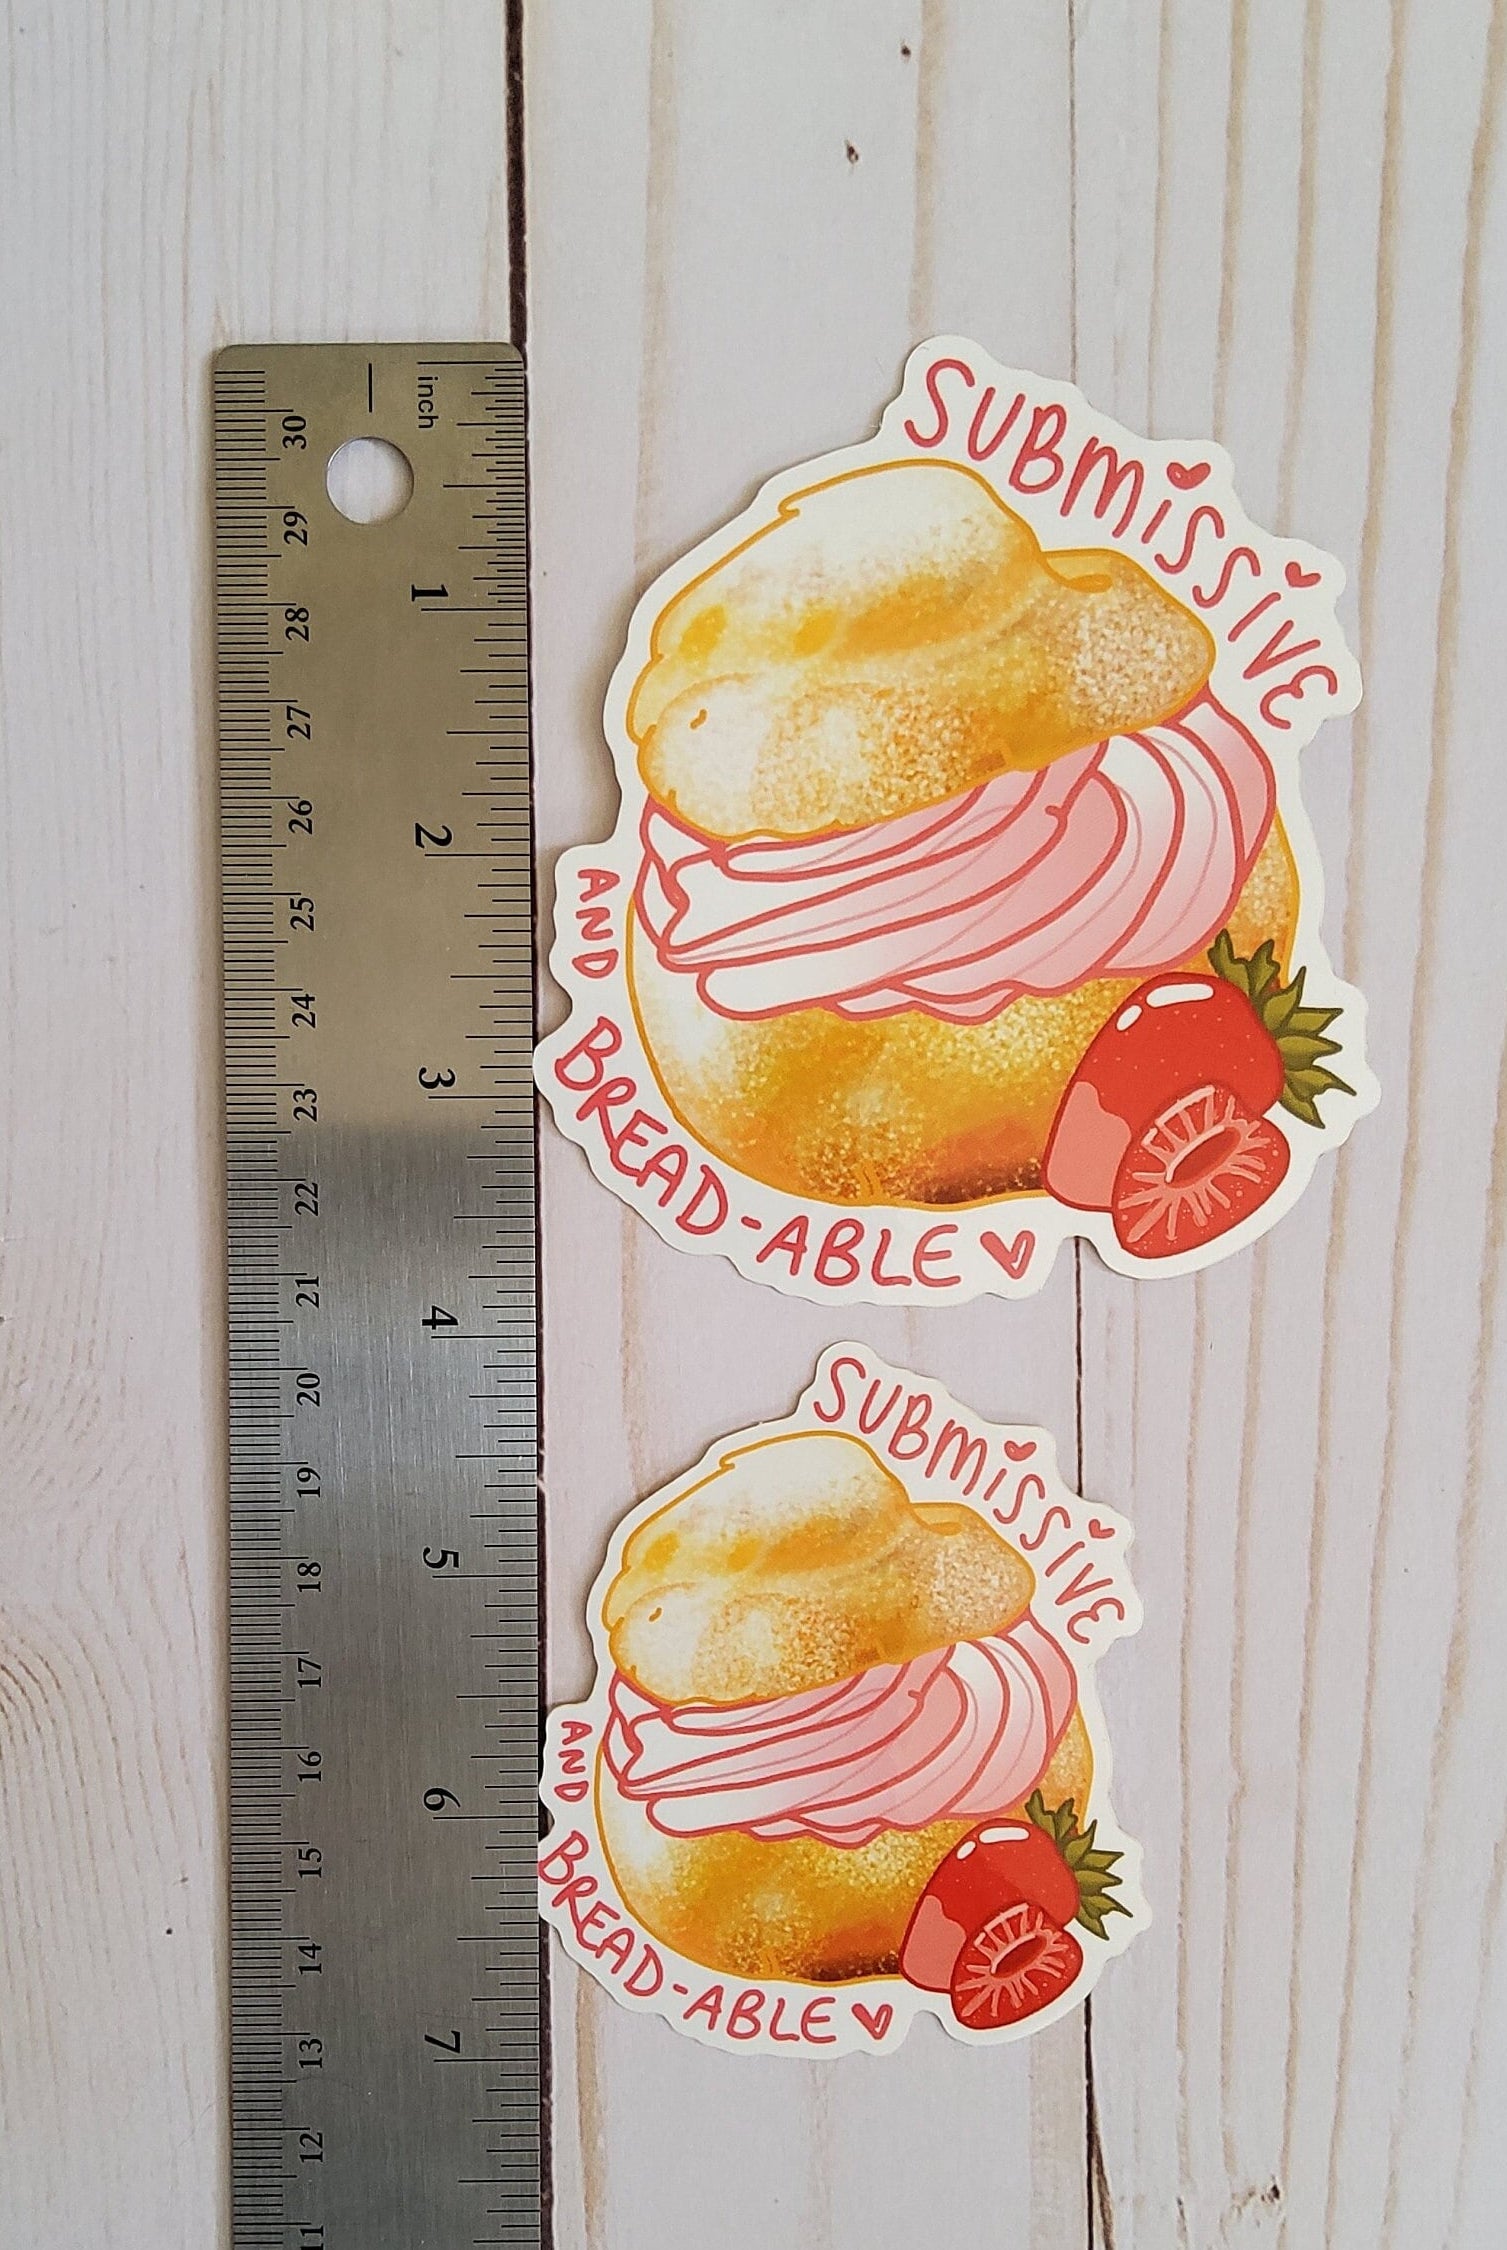 GLOSSY STICKER: Submissive and Breadable Creampuff Sticker , Creampuff Sticker , Pun Creampuff Sticker , Sub Sticker , Bread Sticker